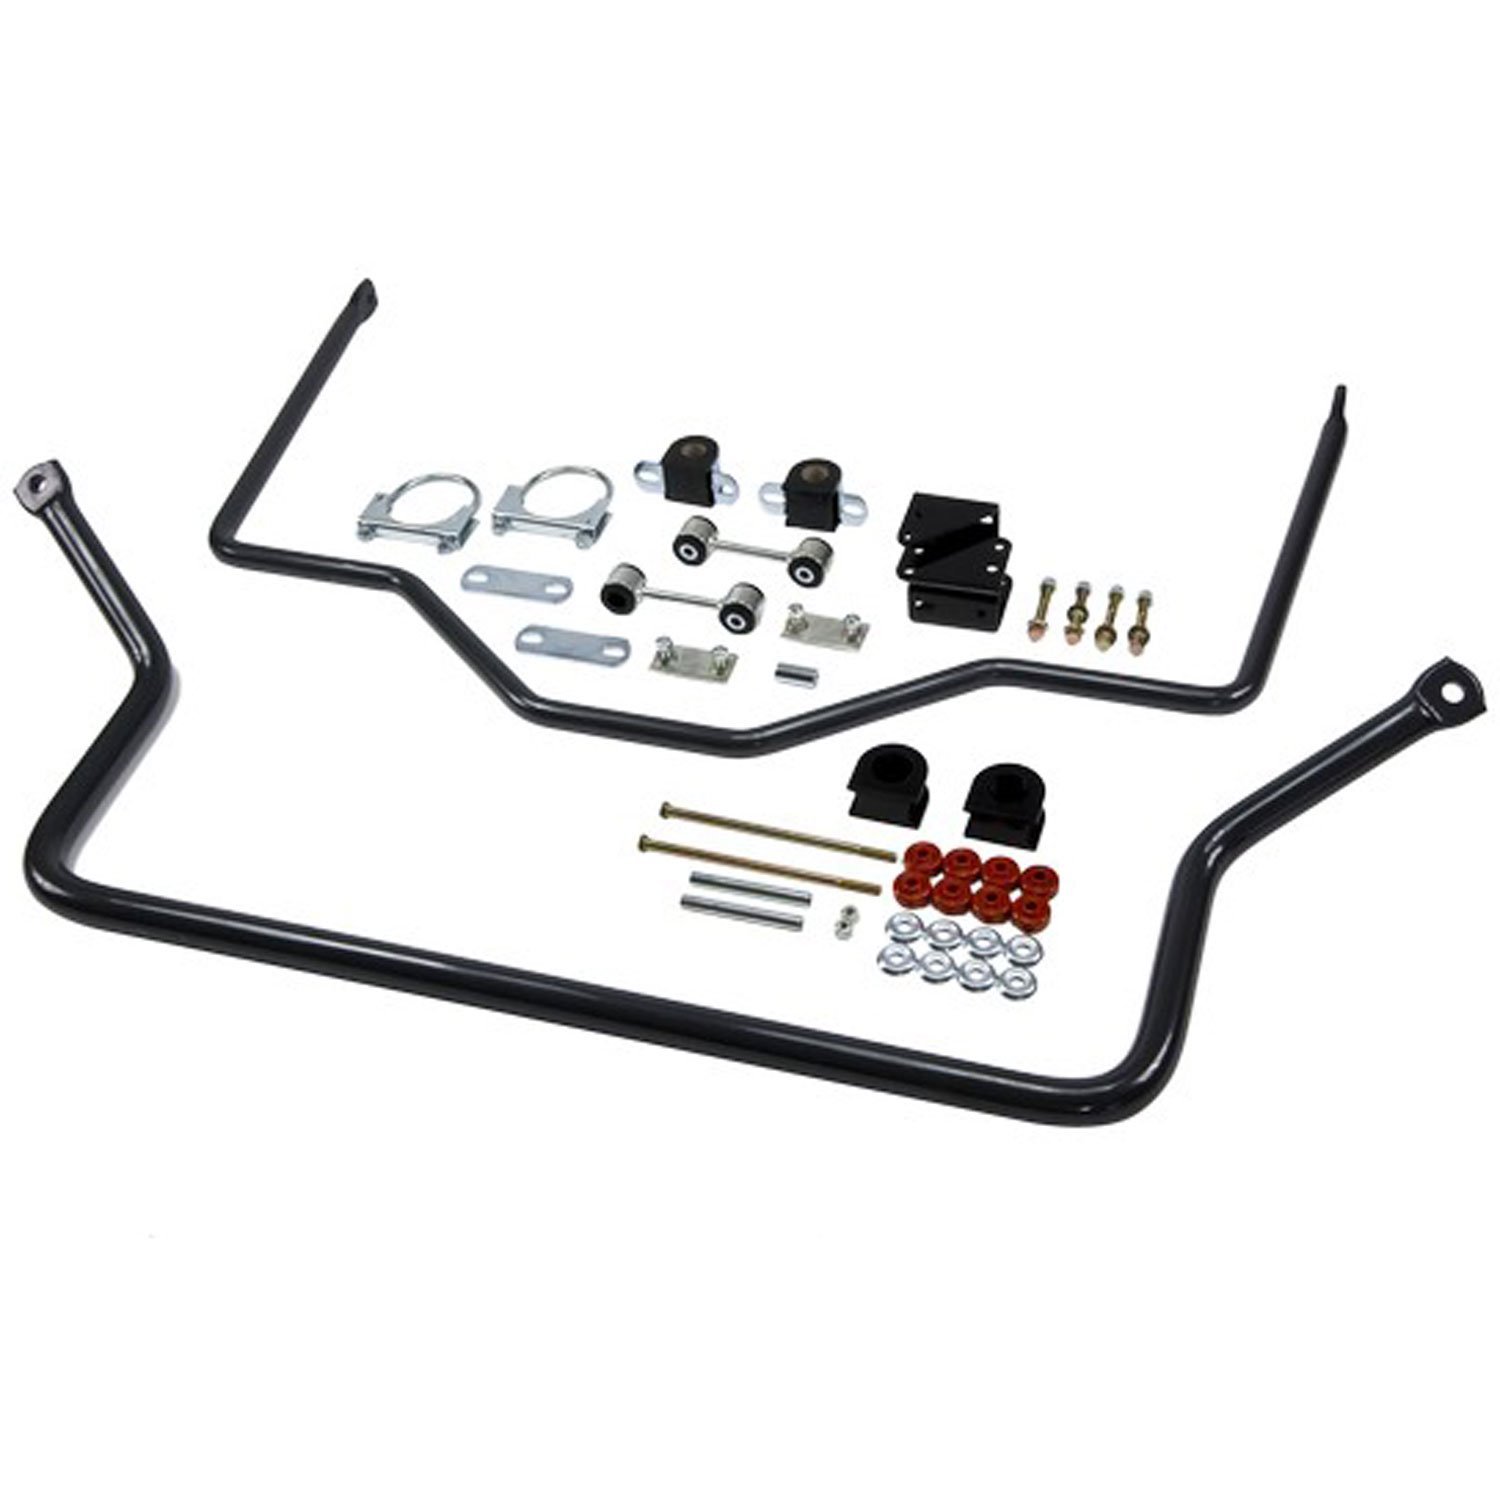 Front/Rear Sway Bar Kit for 1999-2006 C1500 Pick-Up